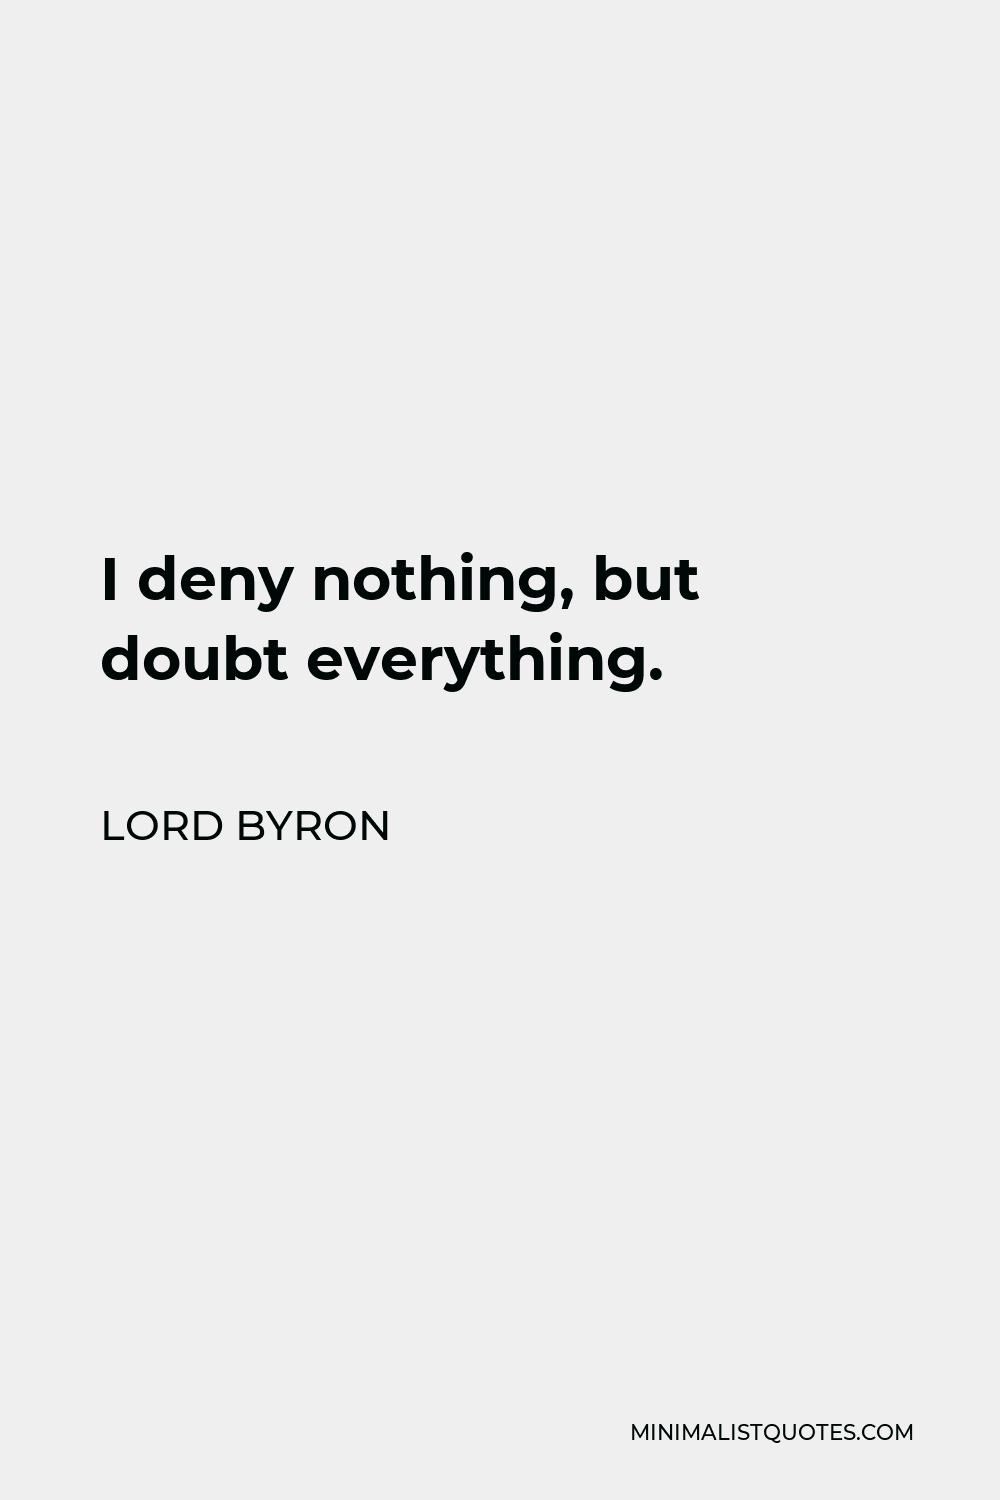 Lord Byron Quote: I deny nothing, but doubt everything.